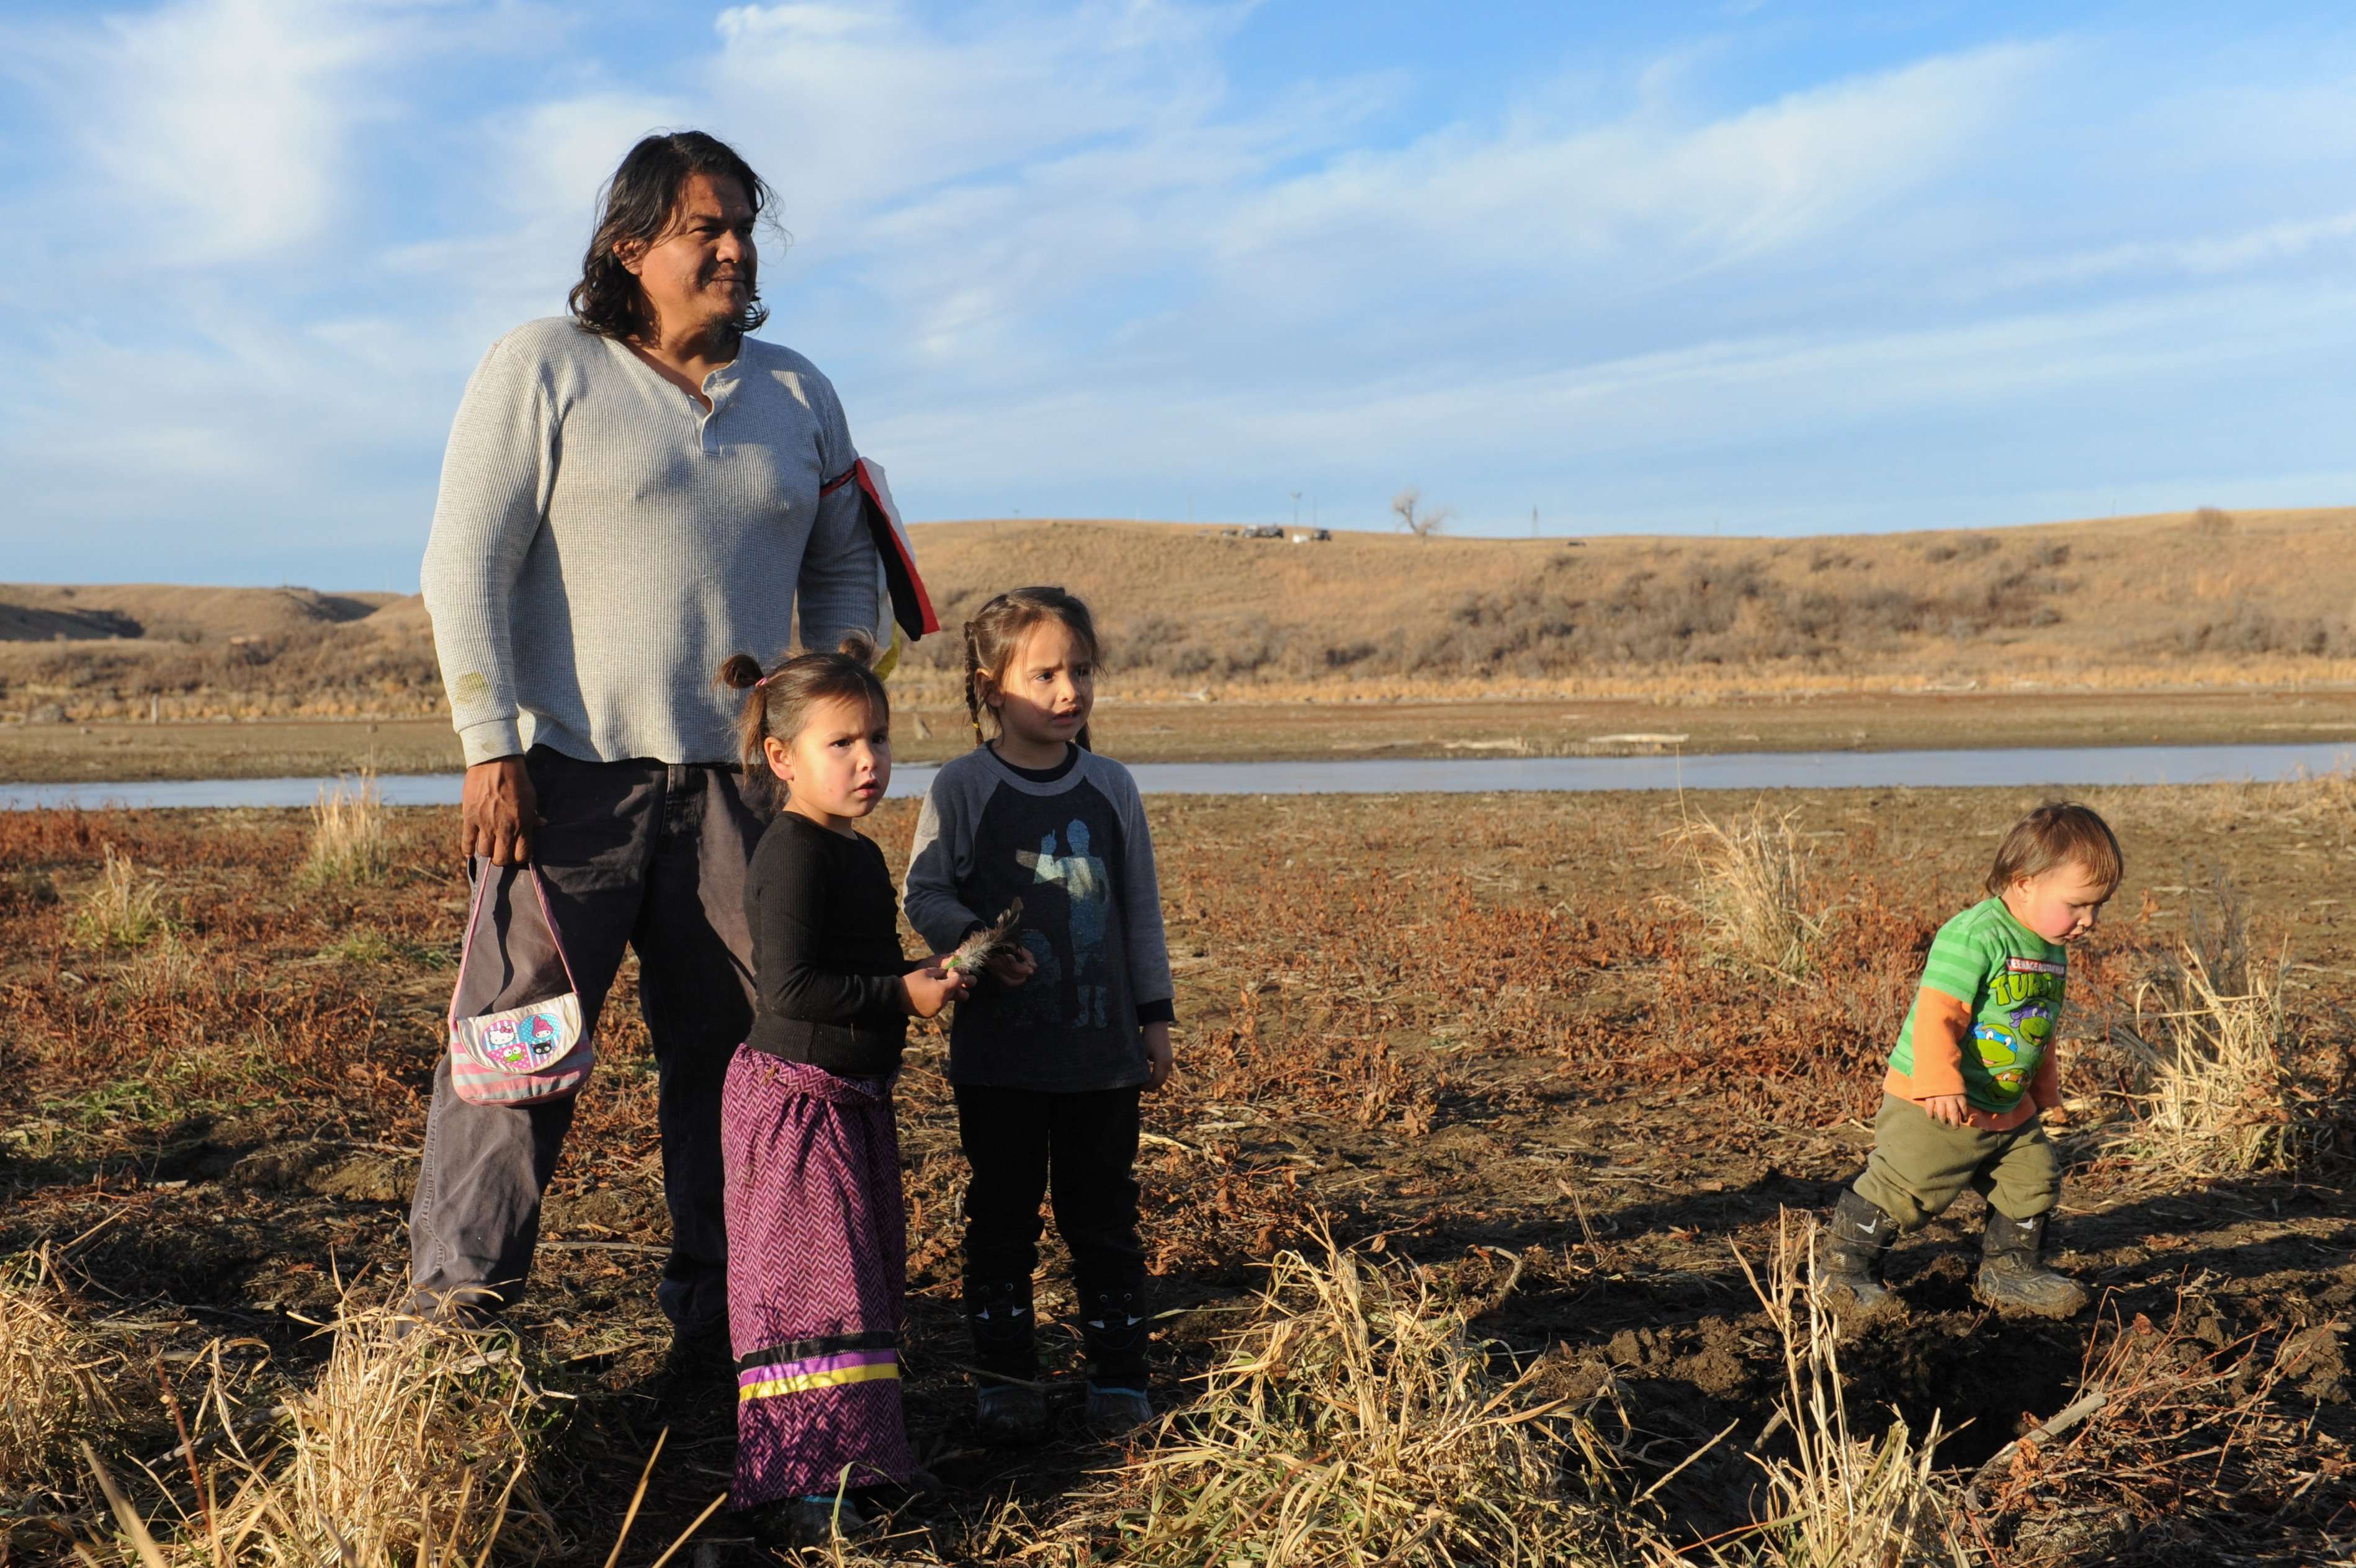 image for 40 years ago we stopped the practice of separating American Indian families. Let’s not reverse course.